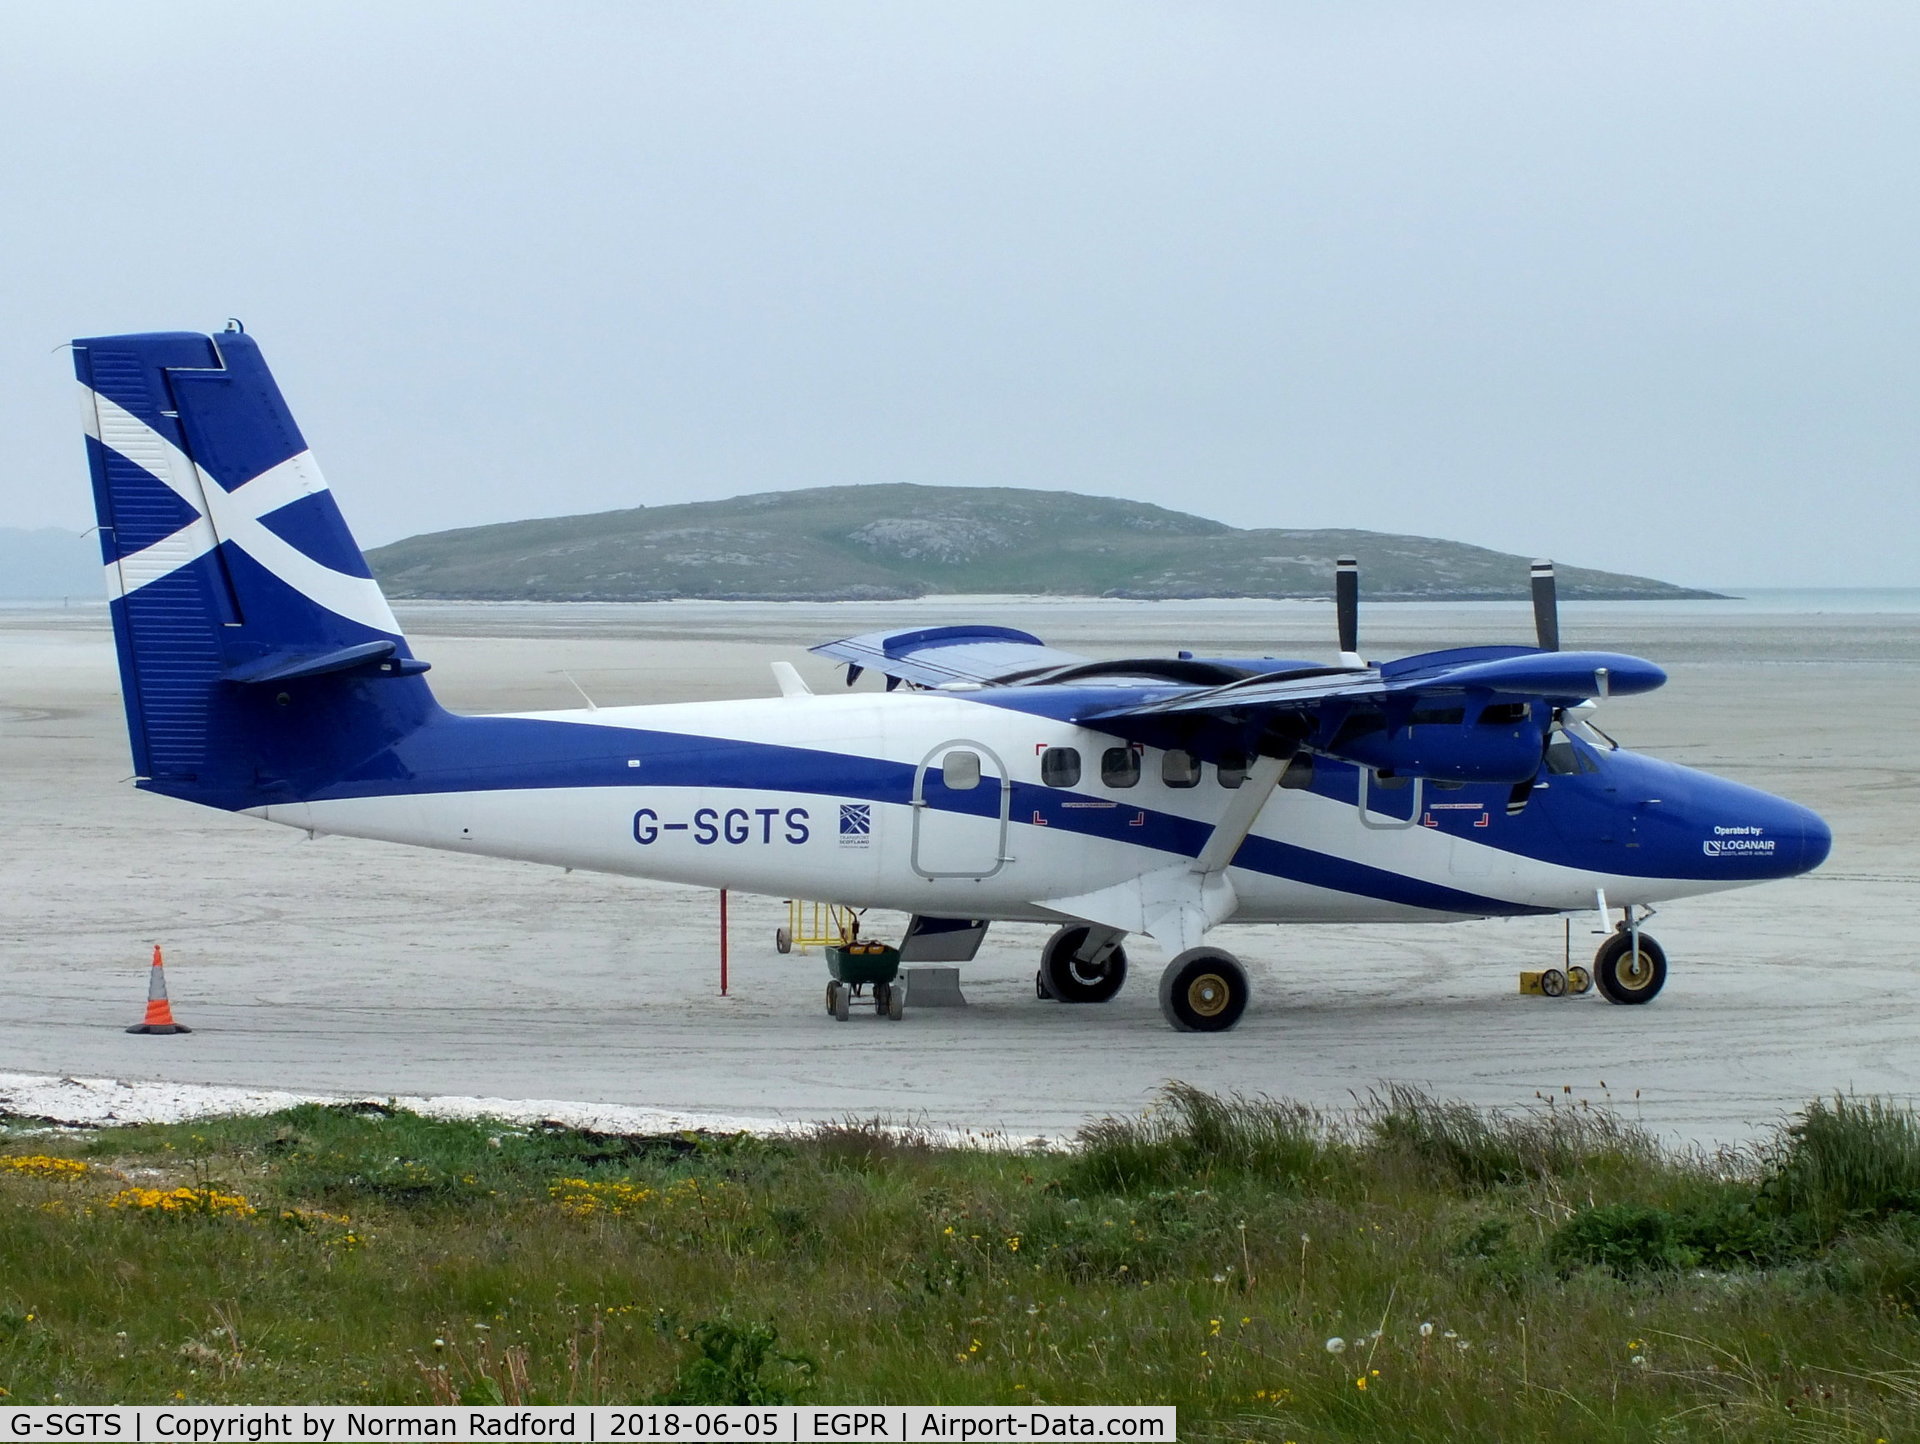 G-SGTS, 2014 Viking DHC-6-400 Twin Otter C/N 918, Just landed at Barra Airport, Isle of Barra, Outer Hebrides, Scotland